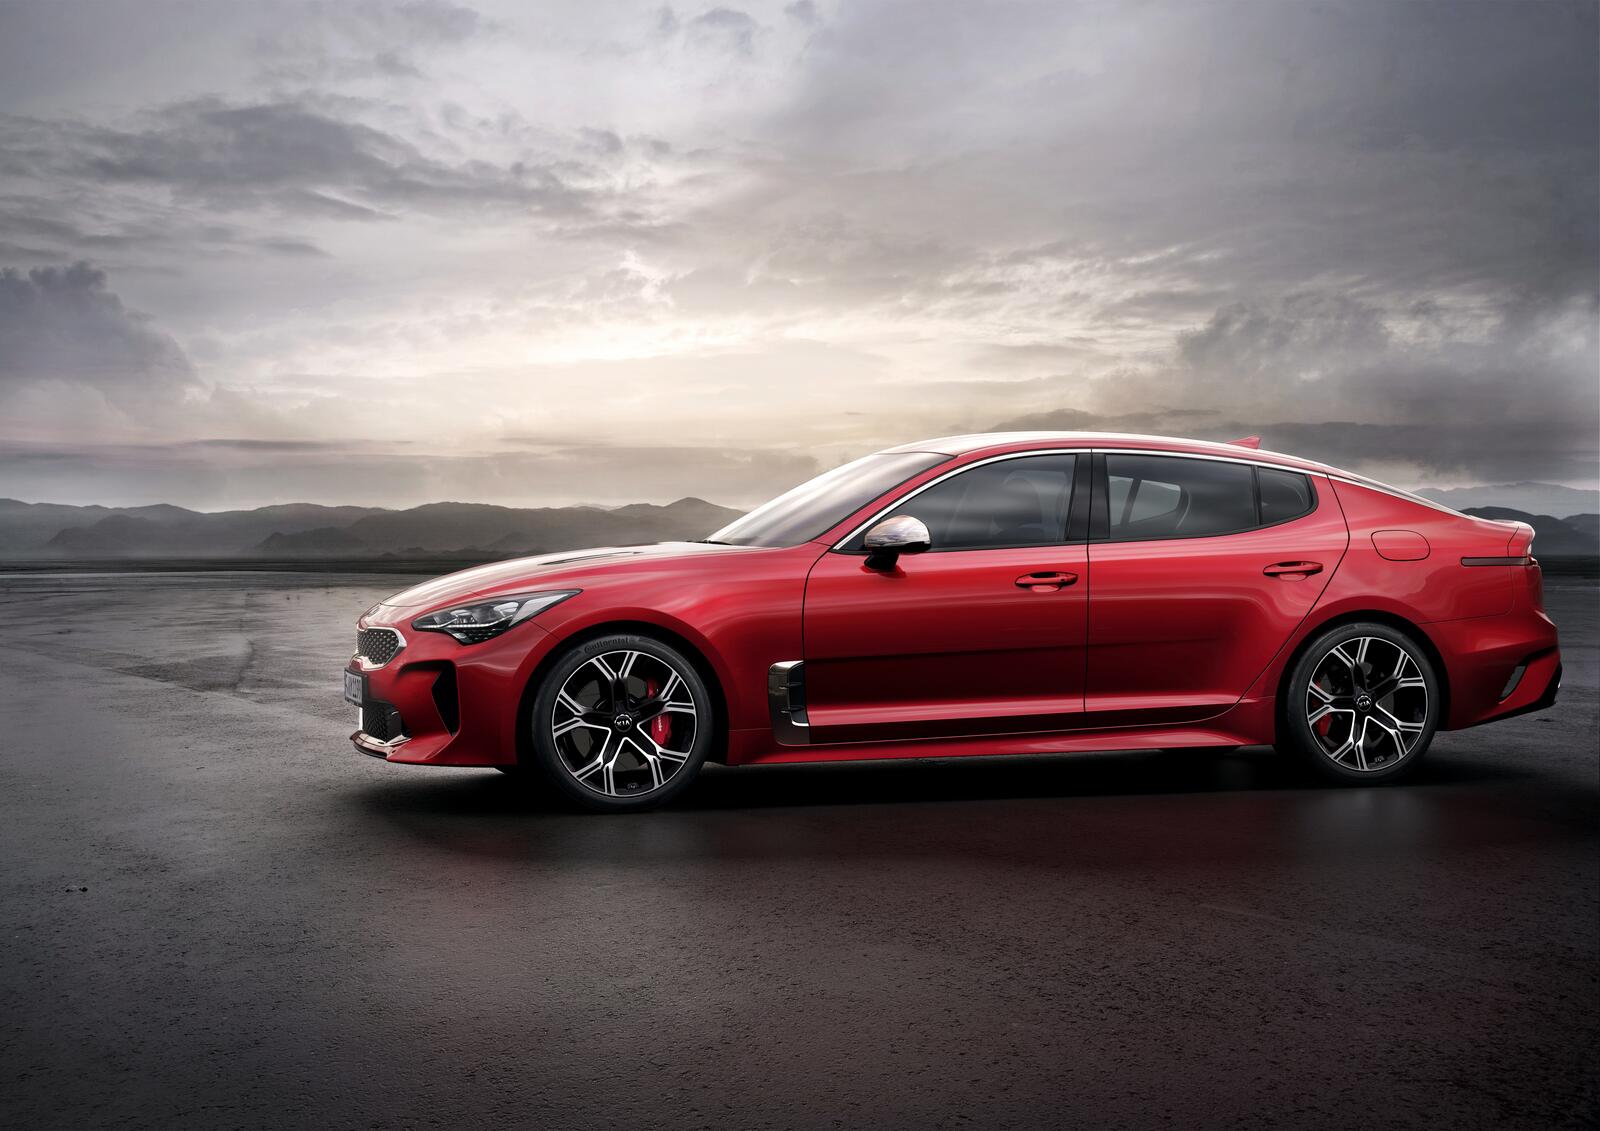 Wallpapers red car kia stinger cars 2020 year on the desktop